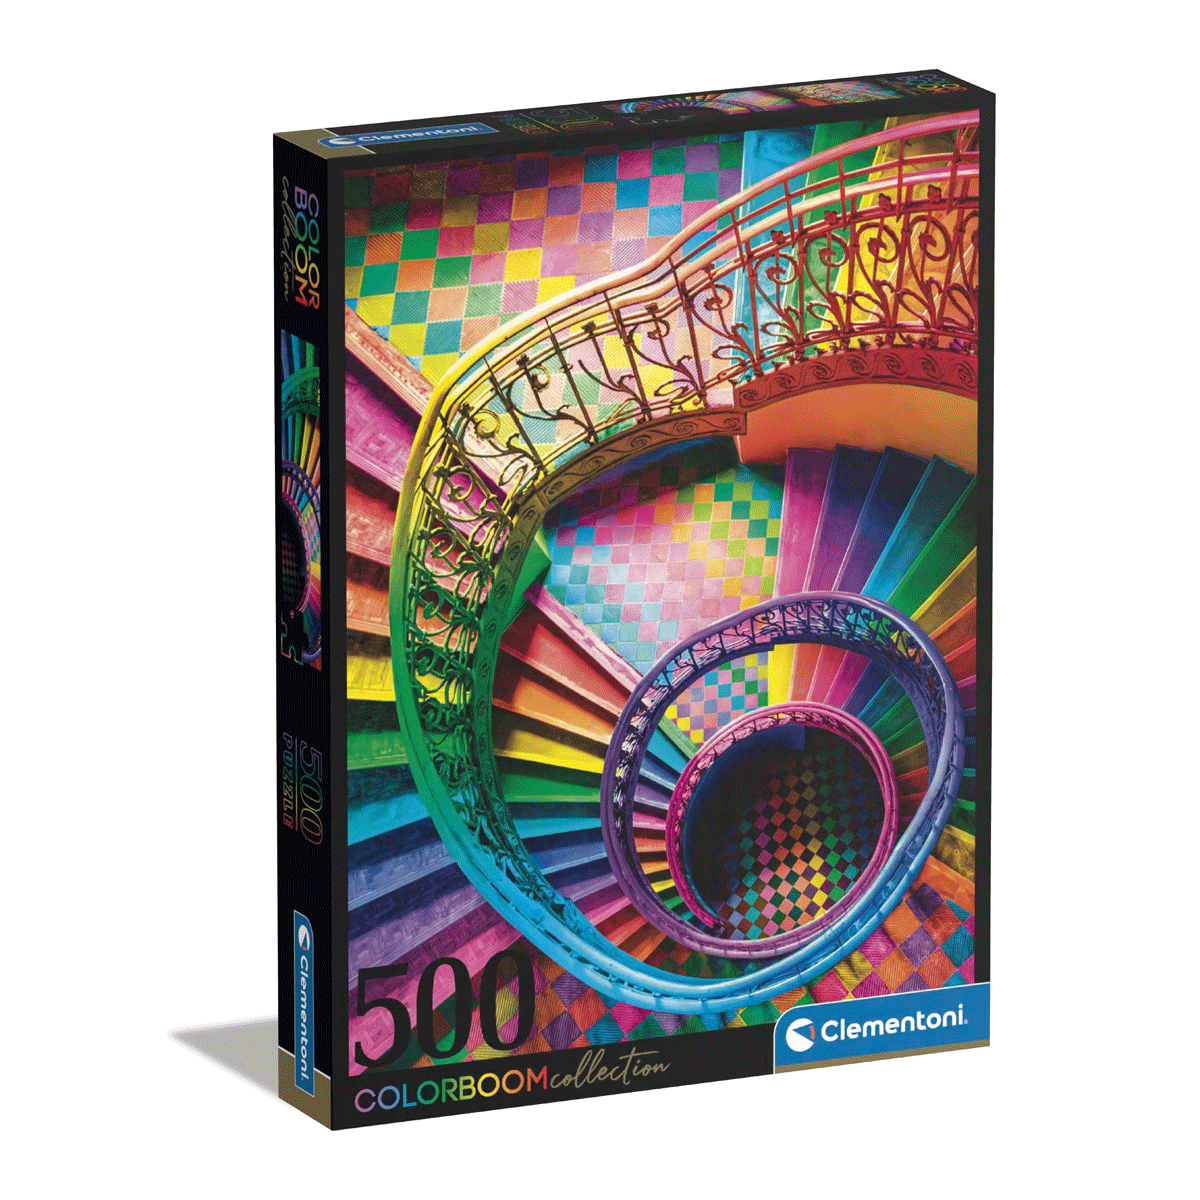 Clementoni puzzle colorboom collection - stairs - 500 pezzi, puzzle adulti - CLEMENTONI